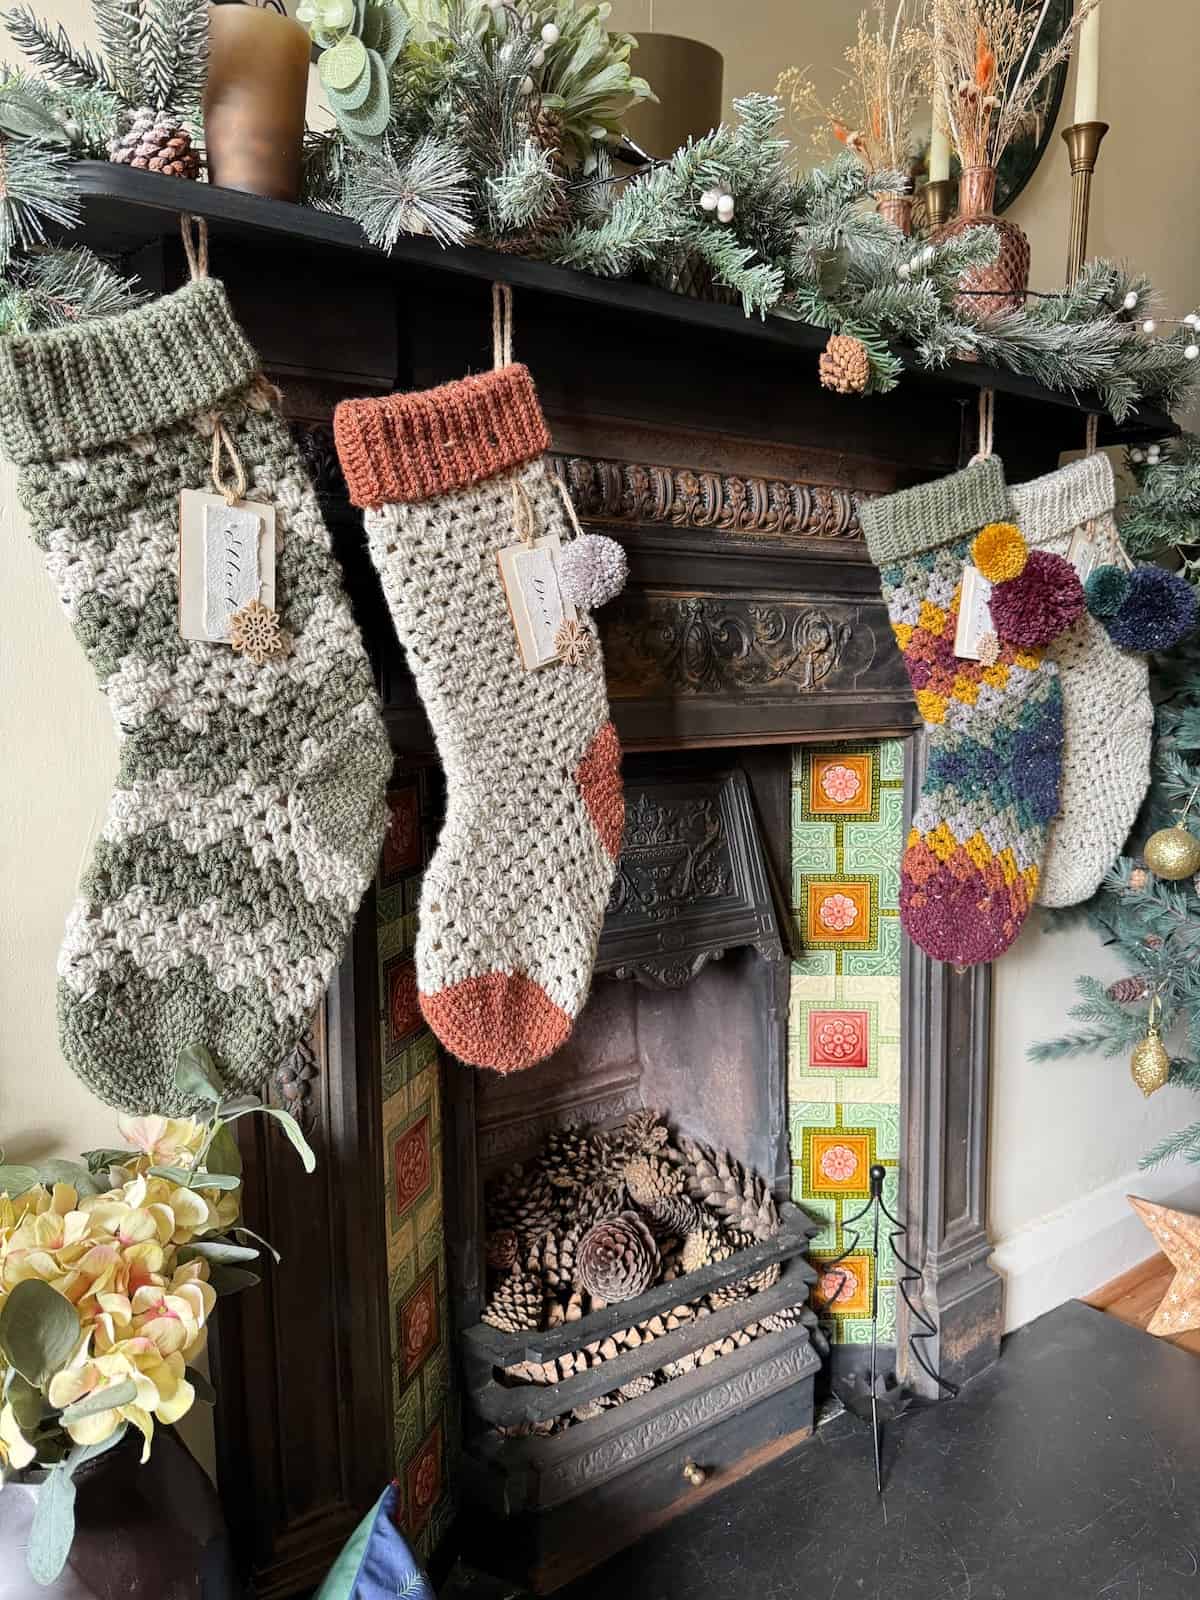 Three crocheted Christmas stockings hanging on a fireplace in rustic colours.